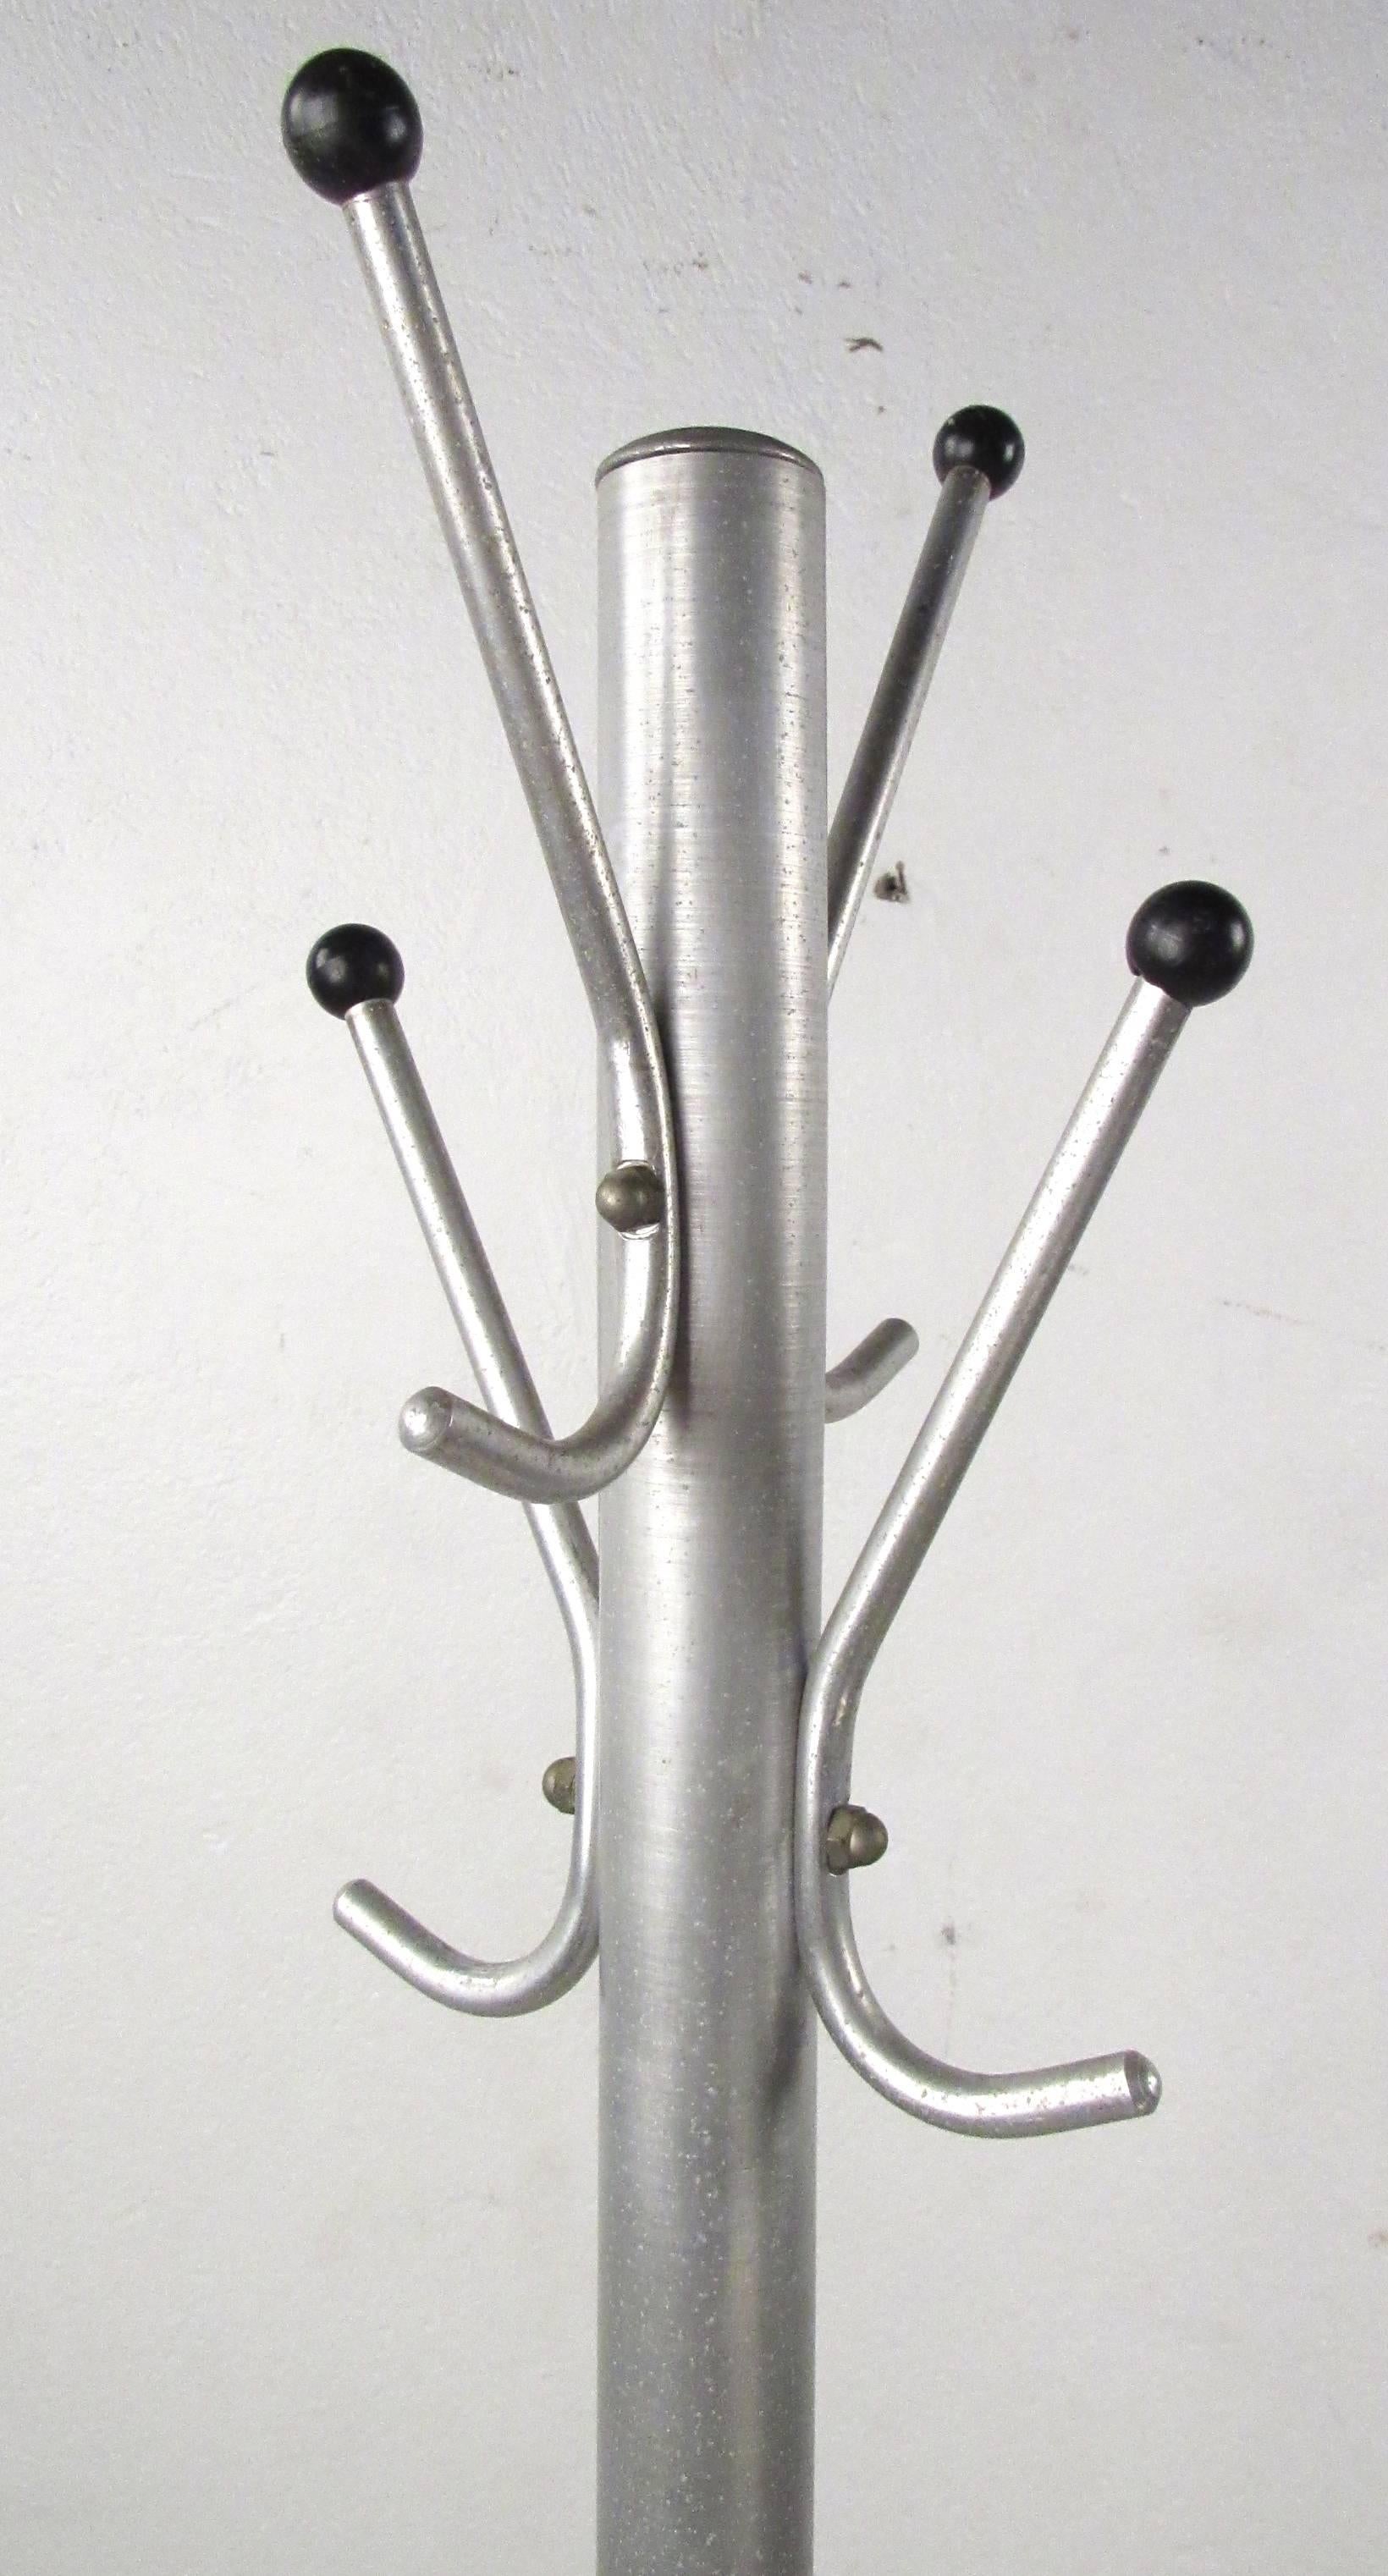 1960s era freestanding aluminum coat stand with heavy weighted base and industrial styling. Please confirm item location (NY or NJ) with dealer.